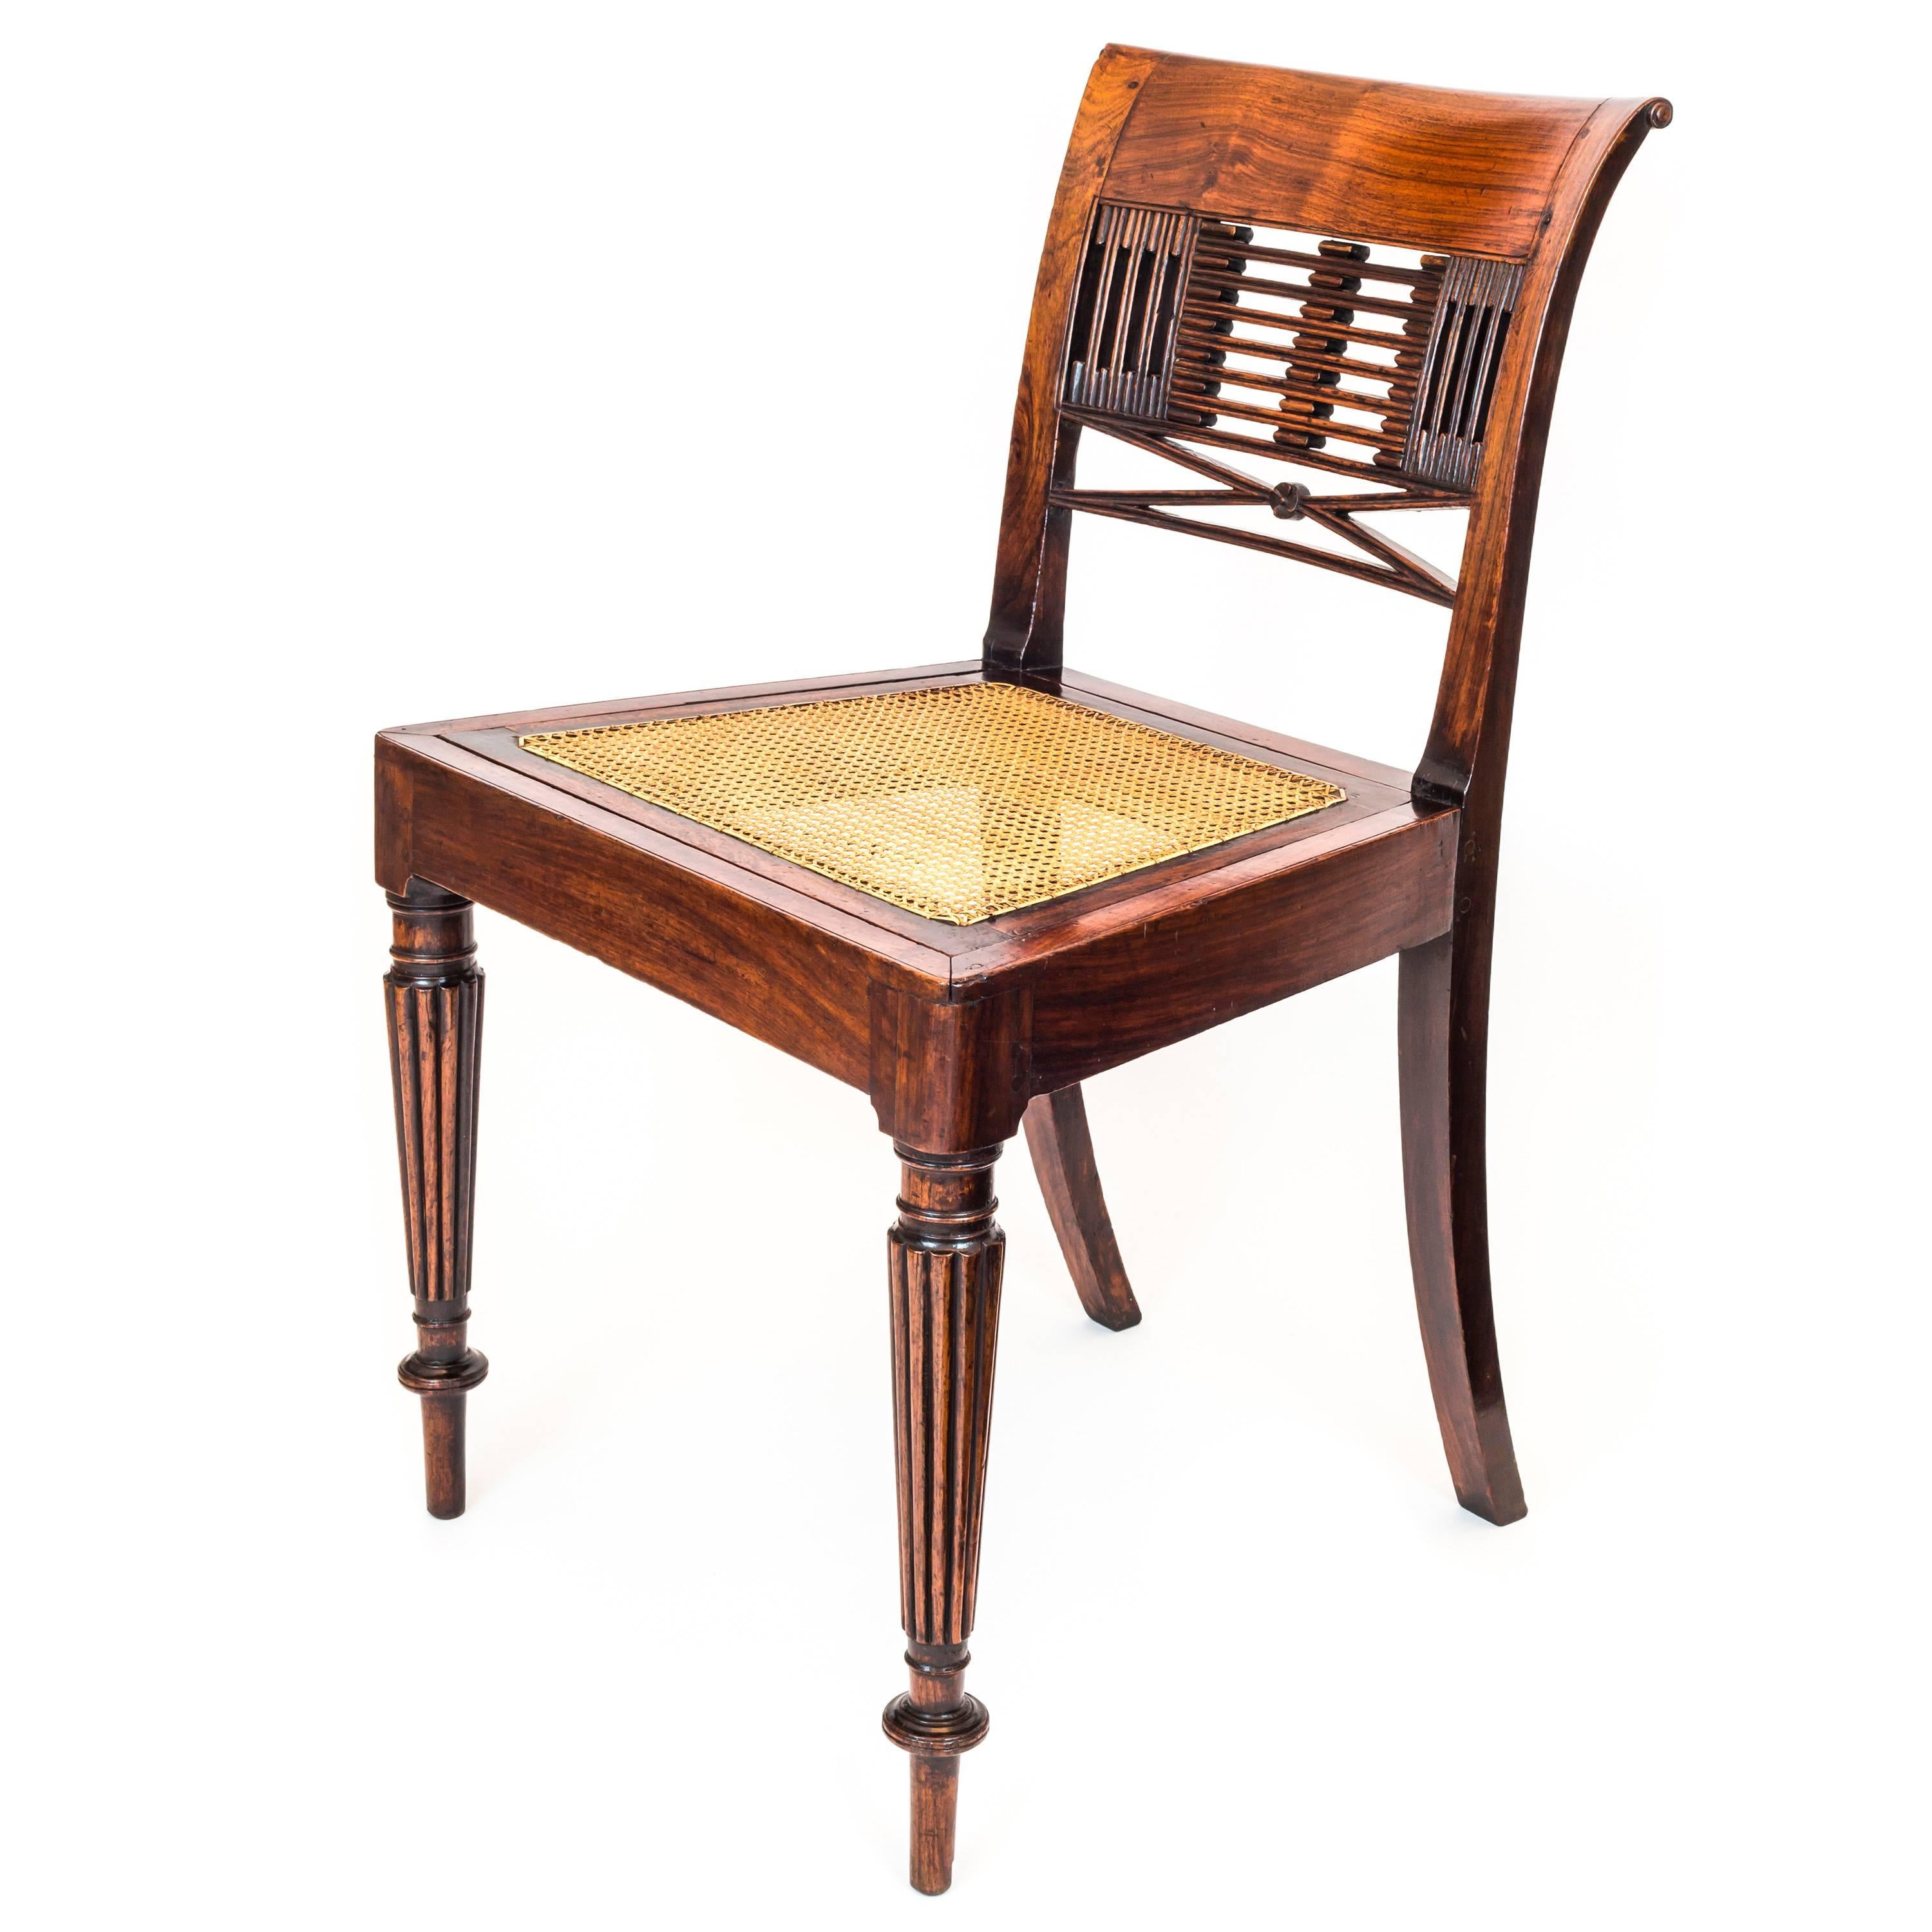 Hand-Carved 19th Century English Colonial Regency Padouk Reeded Leg Side or Desk Chair